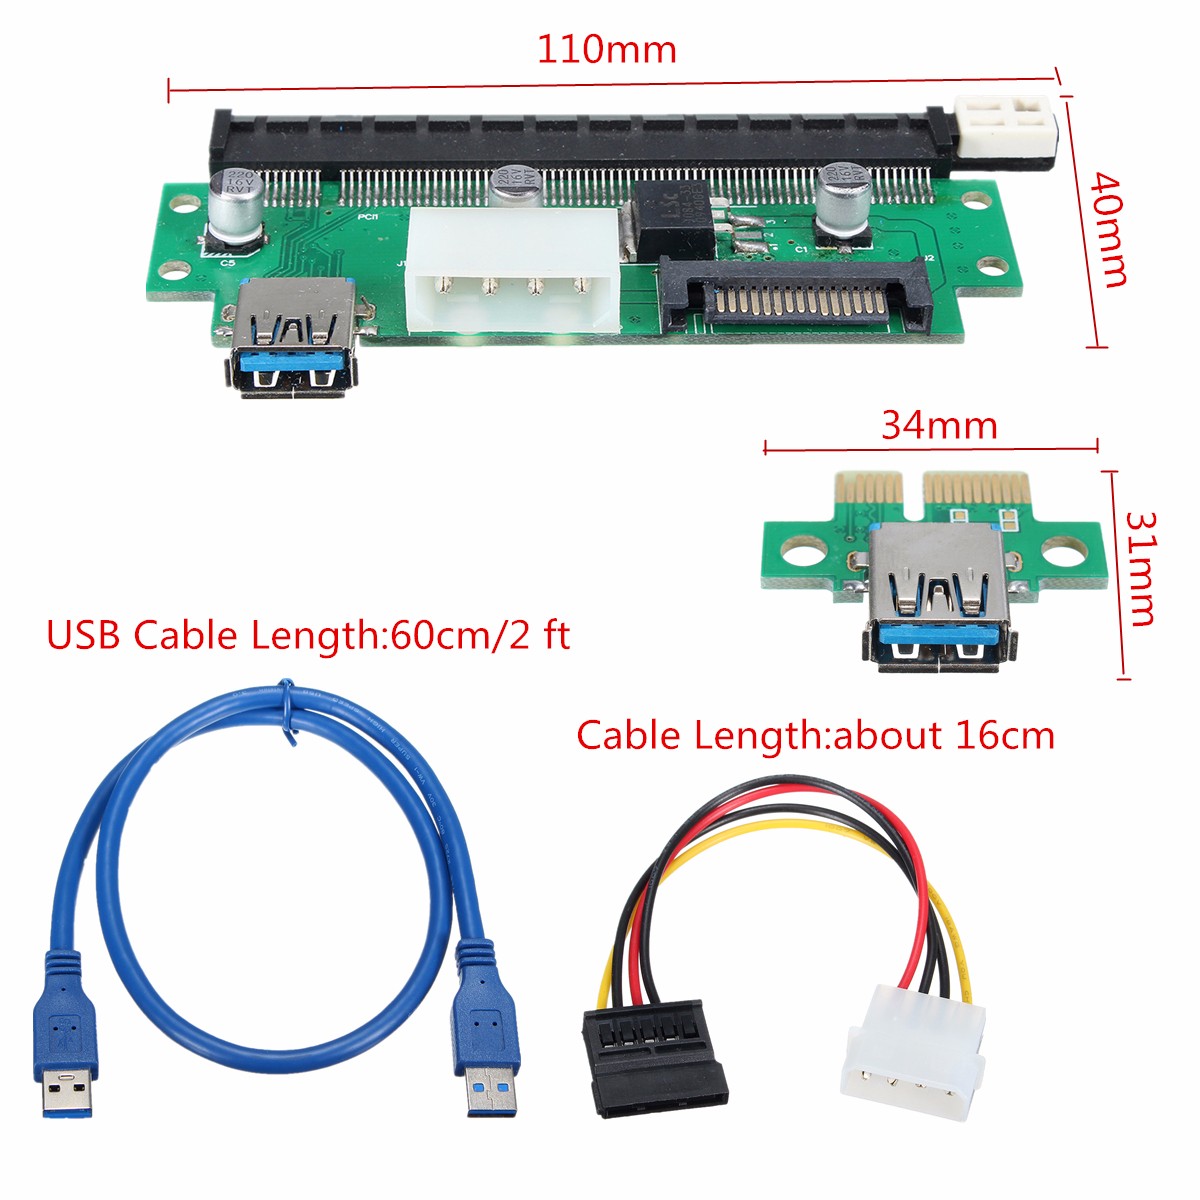 PCI-E-1X-to-16X-Extended-Card-Adapter-USB-30-Extender-Mining-Rig-Graphics-Card-Extension-Adapter-wit-1941181-3